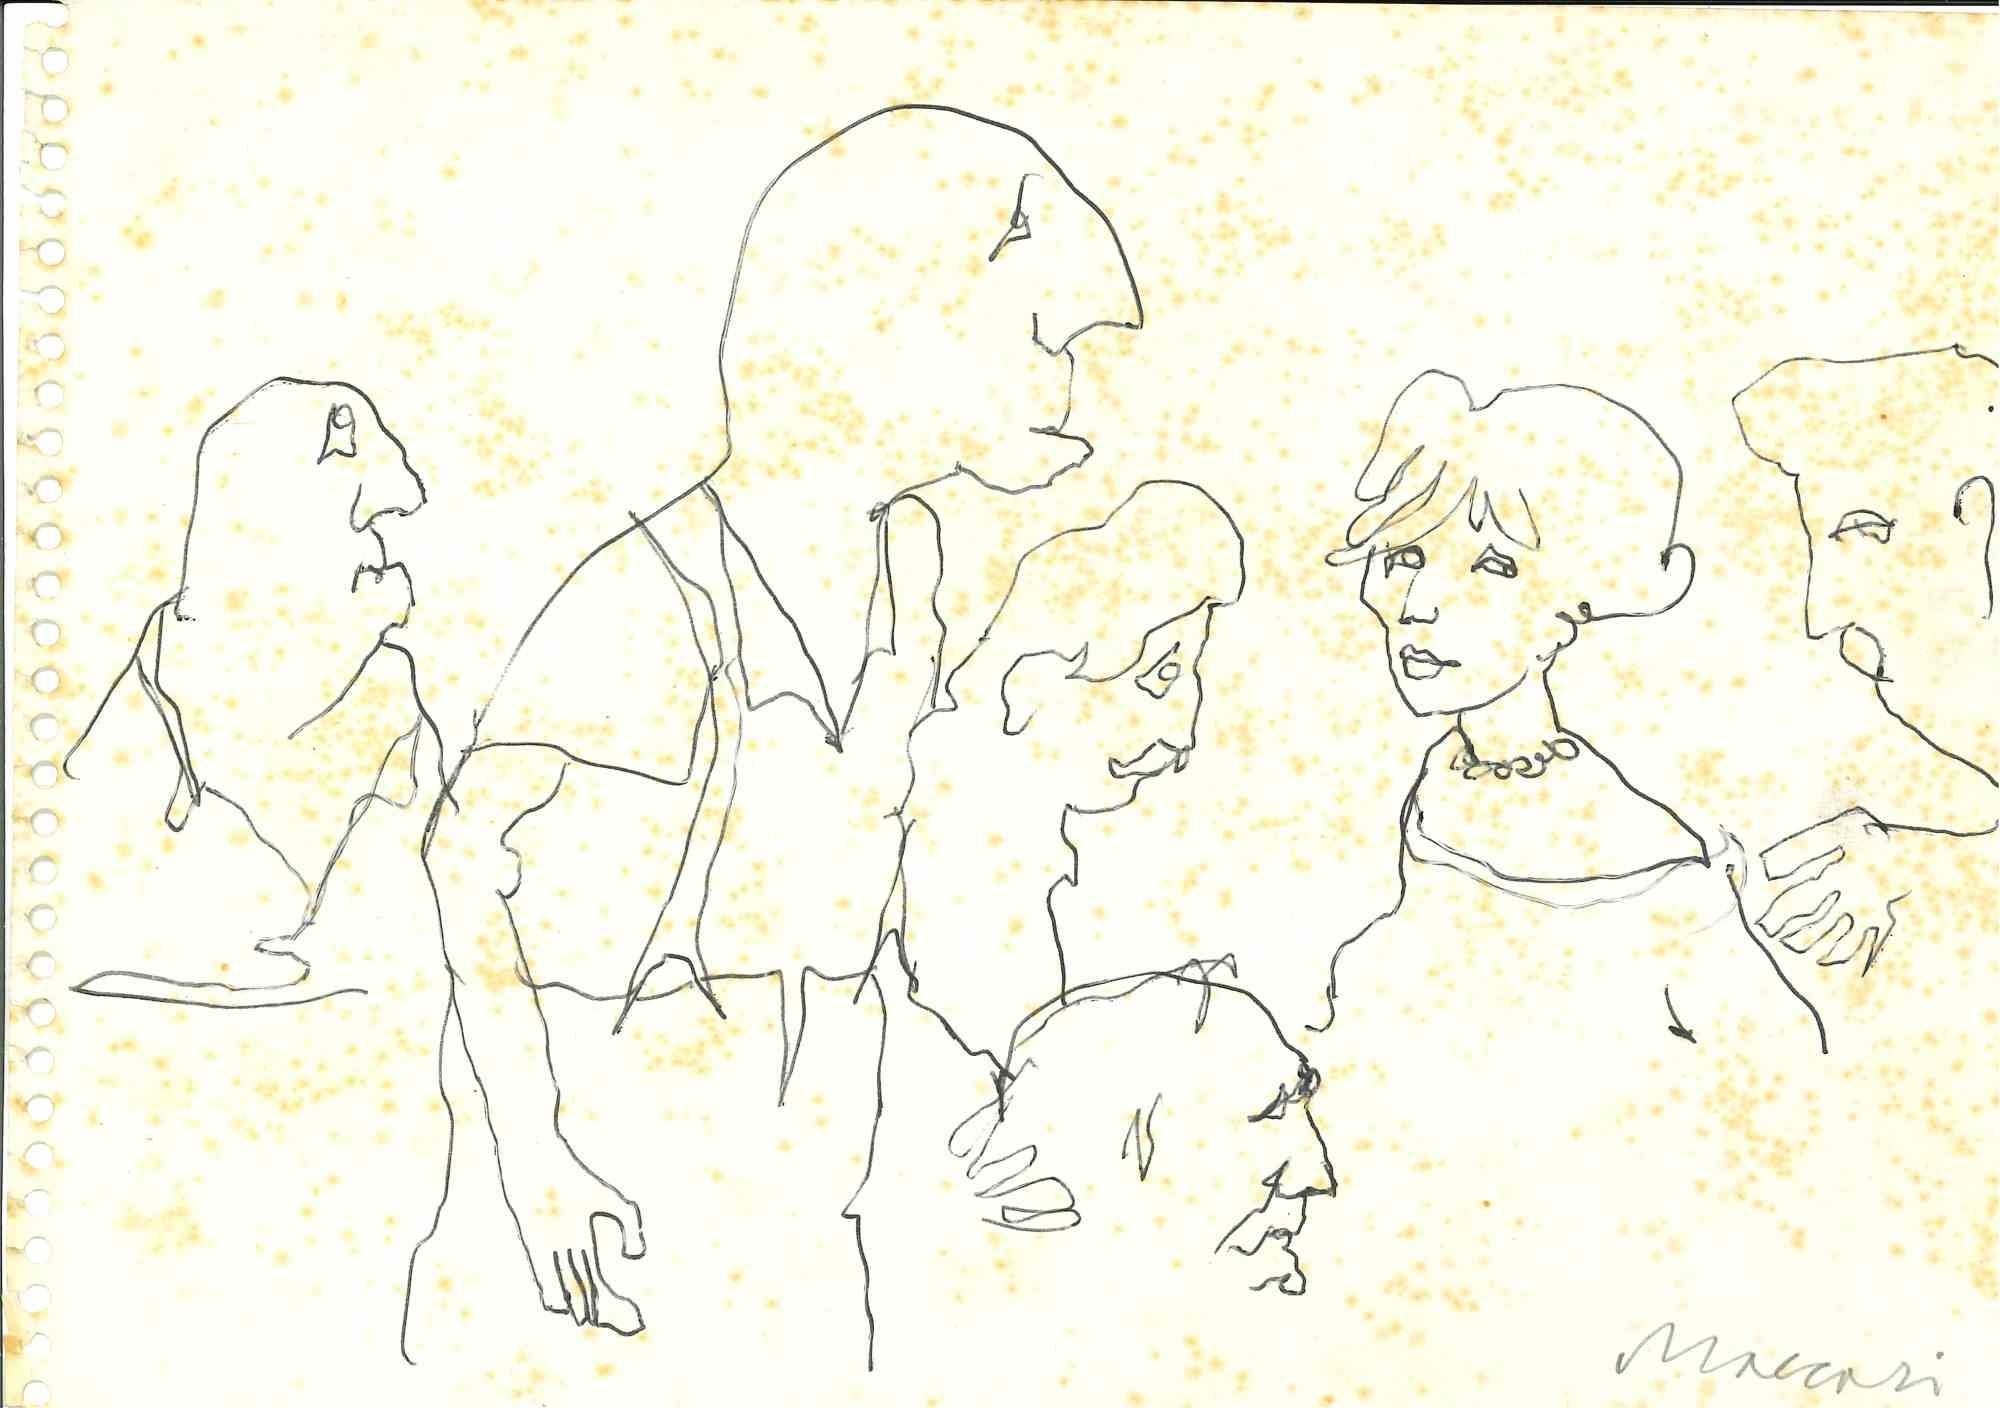 Family Reunion is a pen Drawing realized by Mino Maccari  (1924-1989) in the 1950s.

Hand-signed on the lower margin.

Good condition.

Mino Maccari (Siena, 1924-Rome, June 16, 1989) was an Italian writer, painter, engraver and journalist, winner of